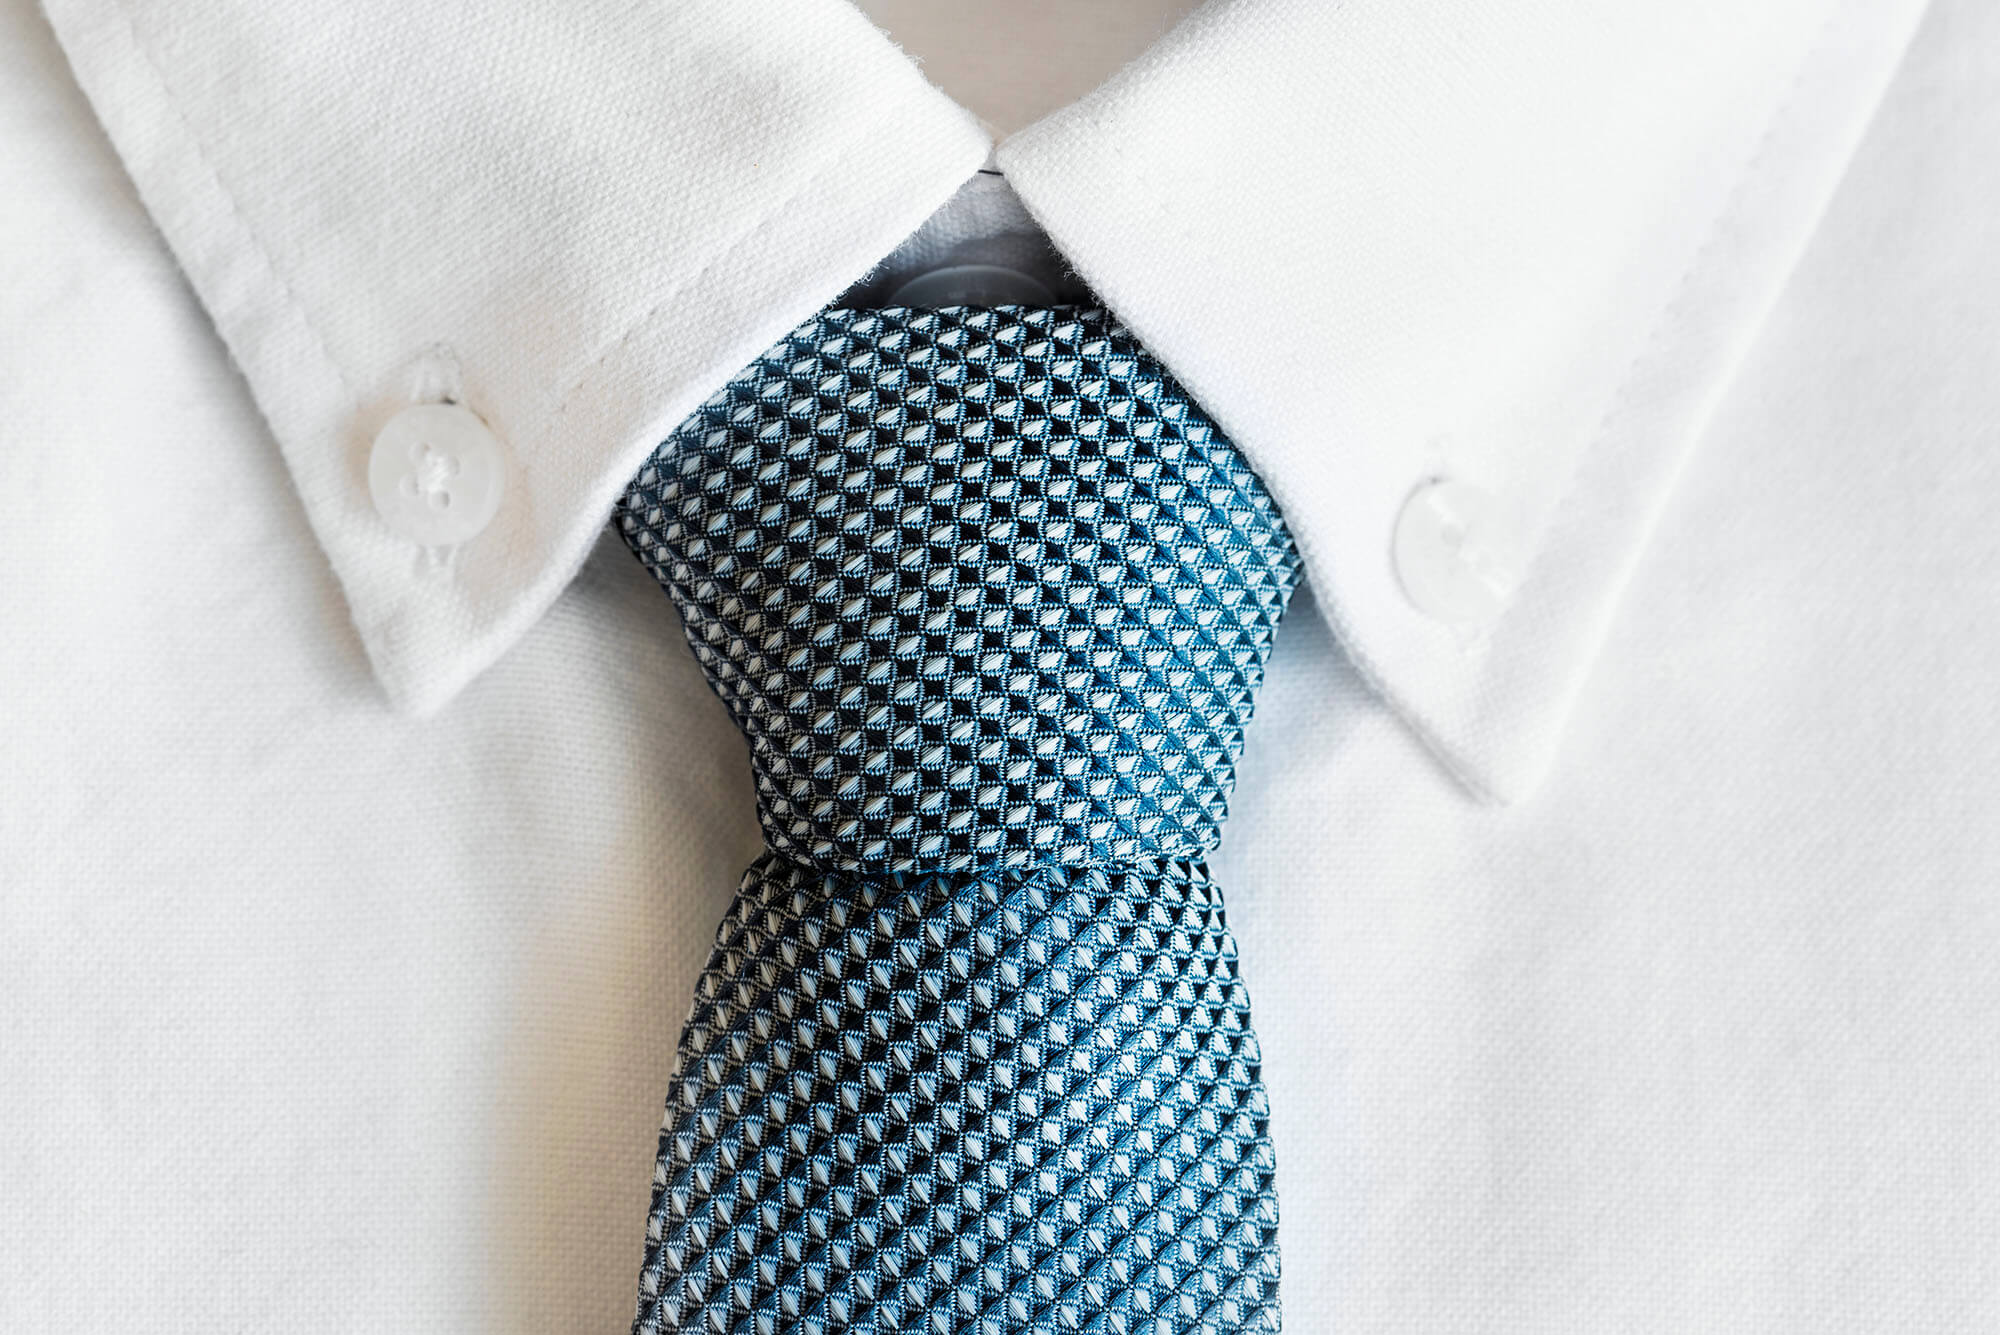 How to Tie a Tie for a Wedding